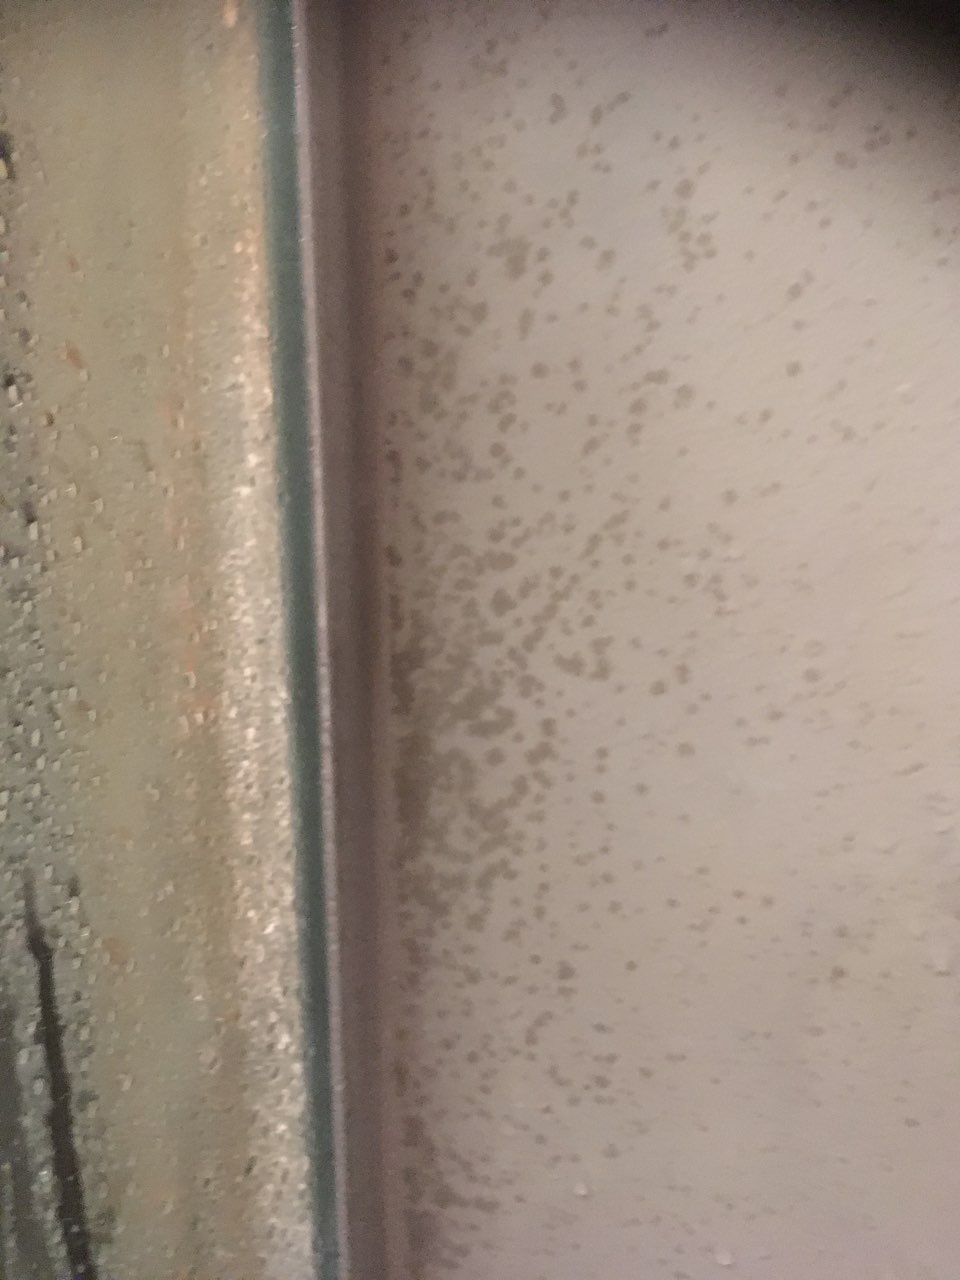 Damp issue on microcement shower